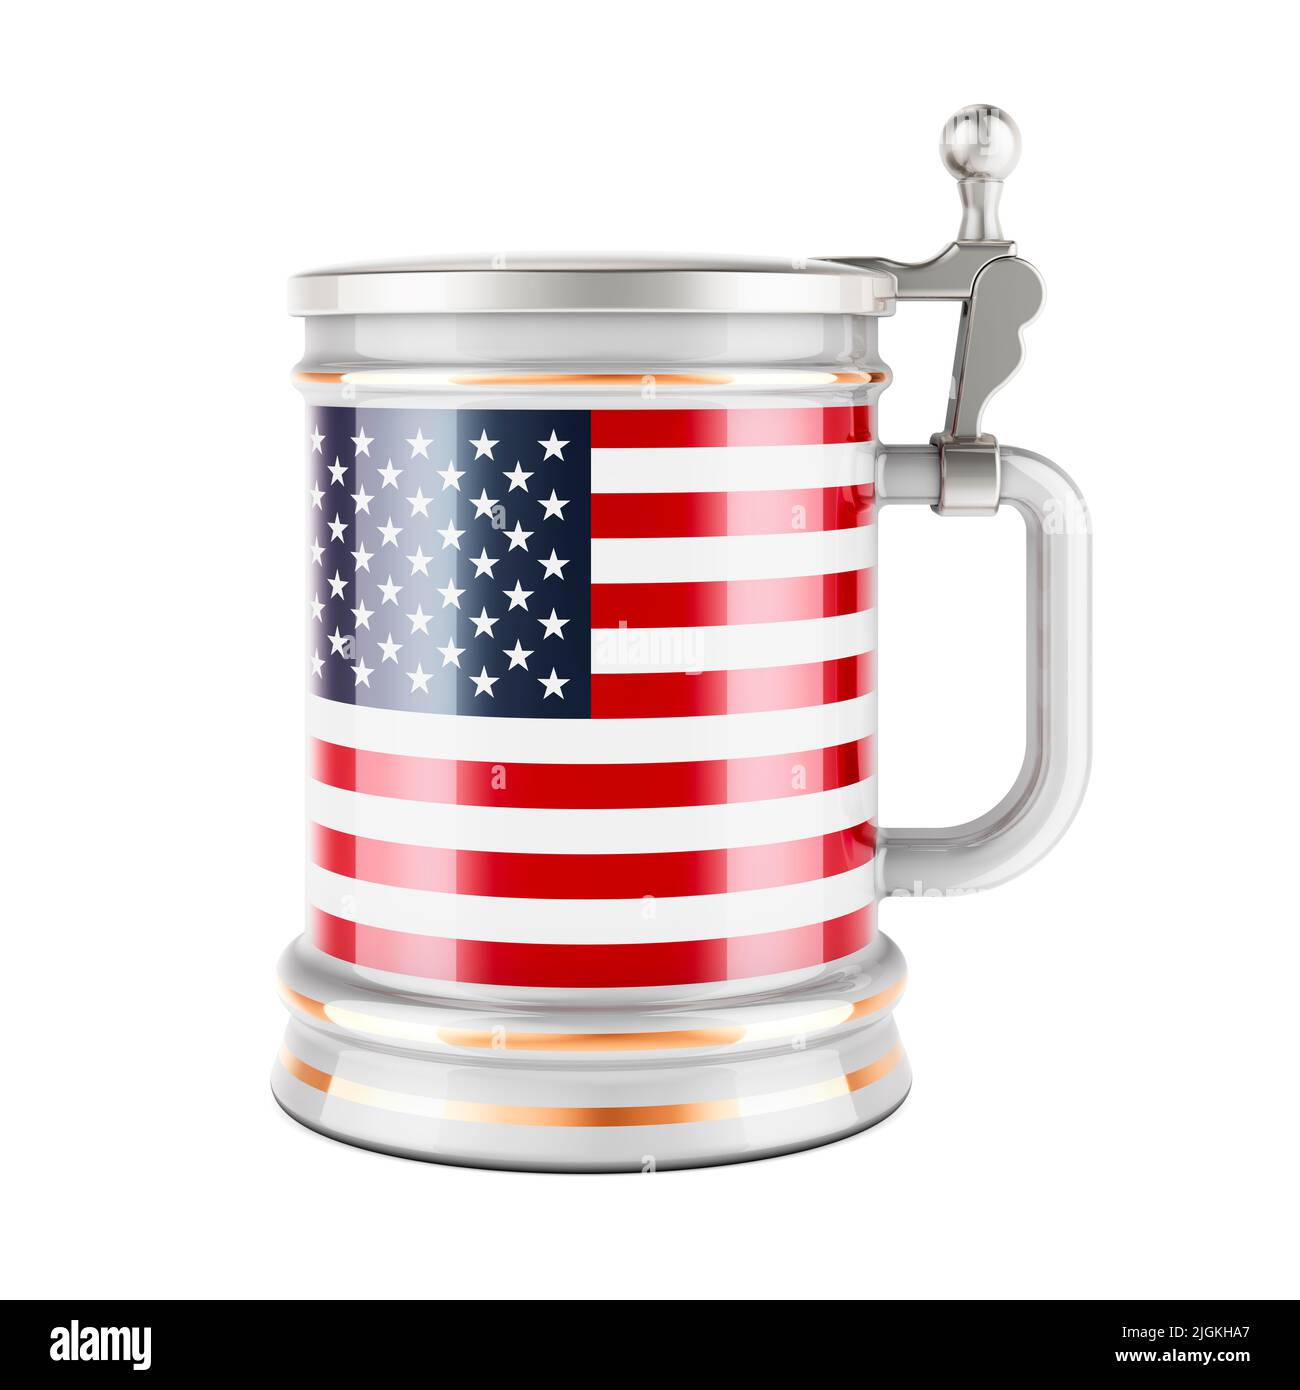 Beer mug with the United States flag, 3D rendering isolated on white background Stock Photo